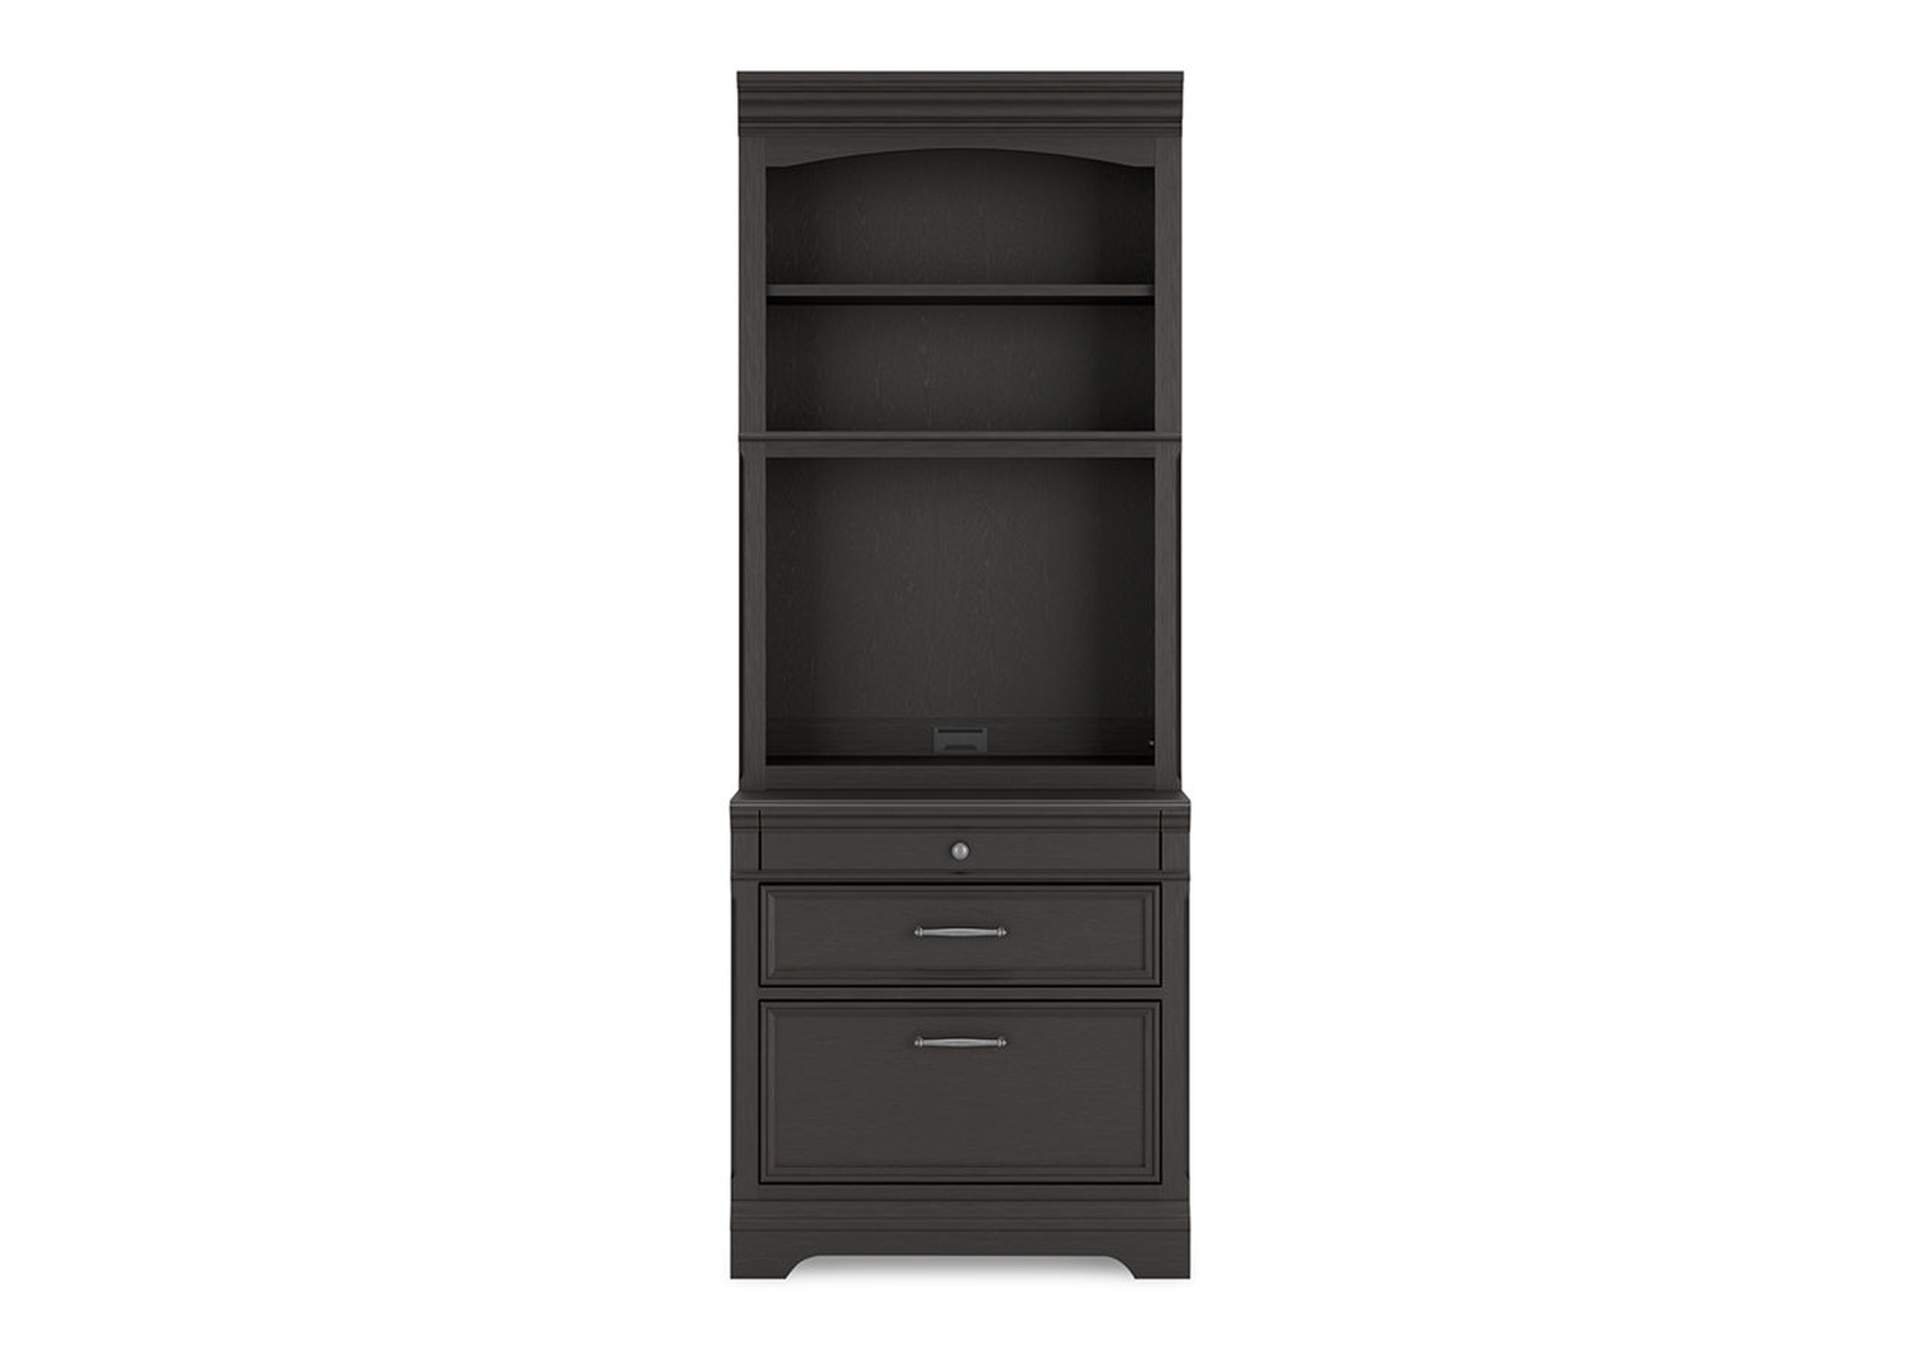 Beckincreek Bookcase,Signature Design By Ashley